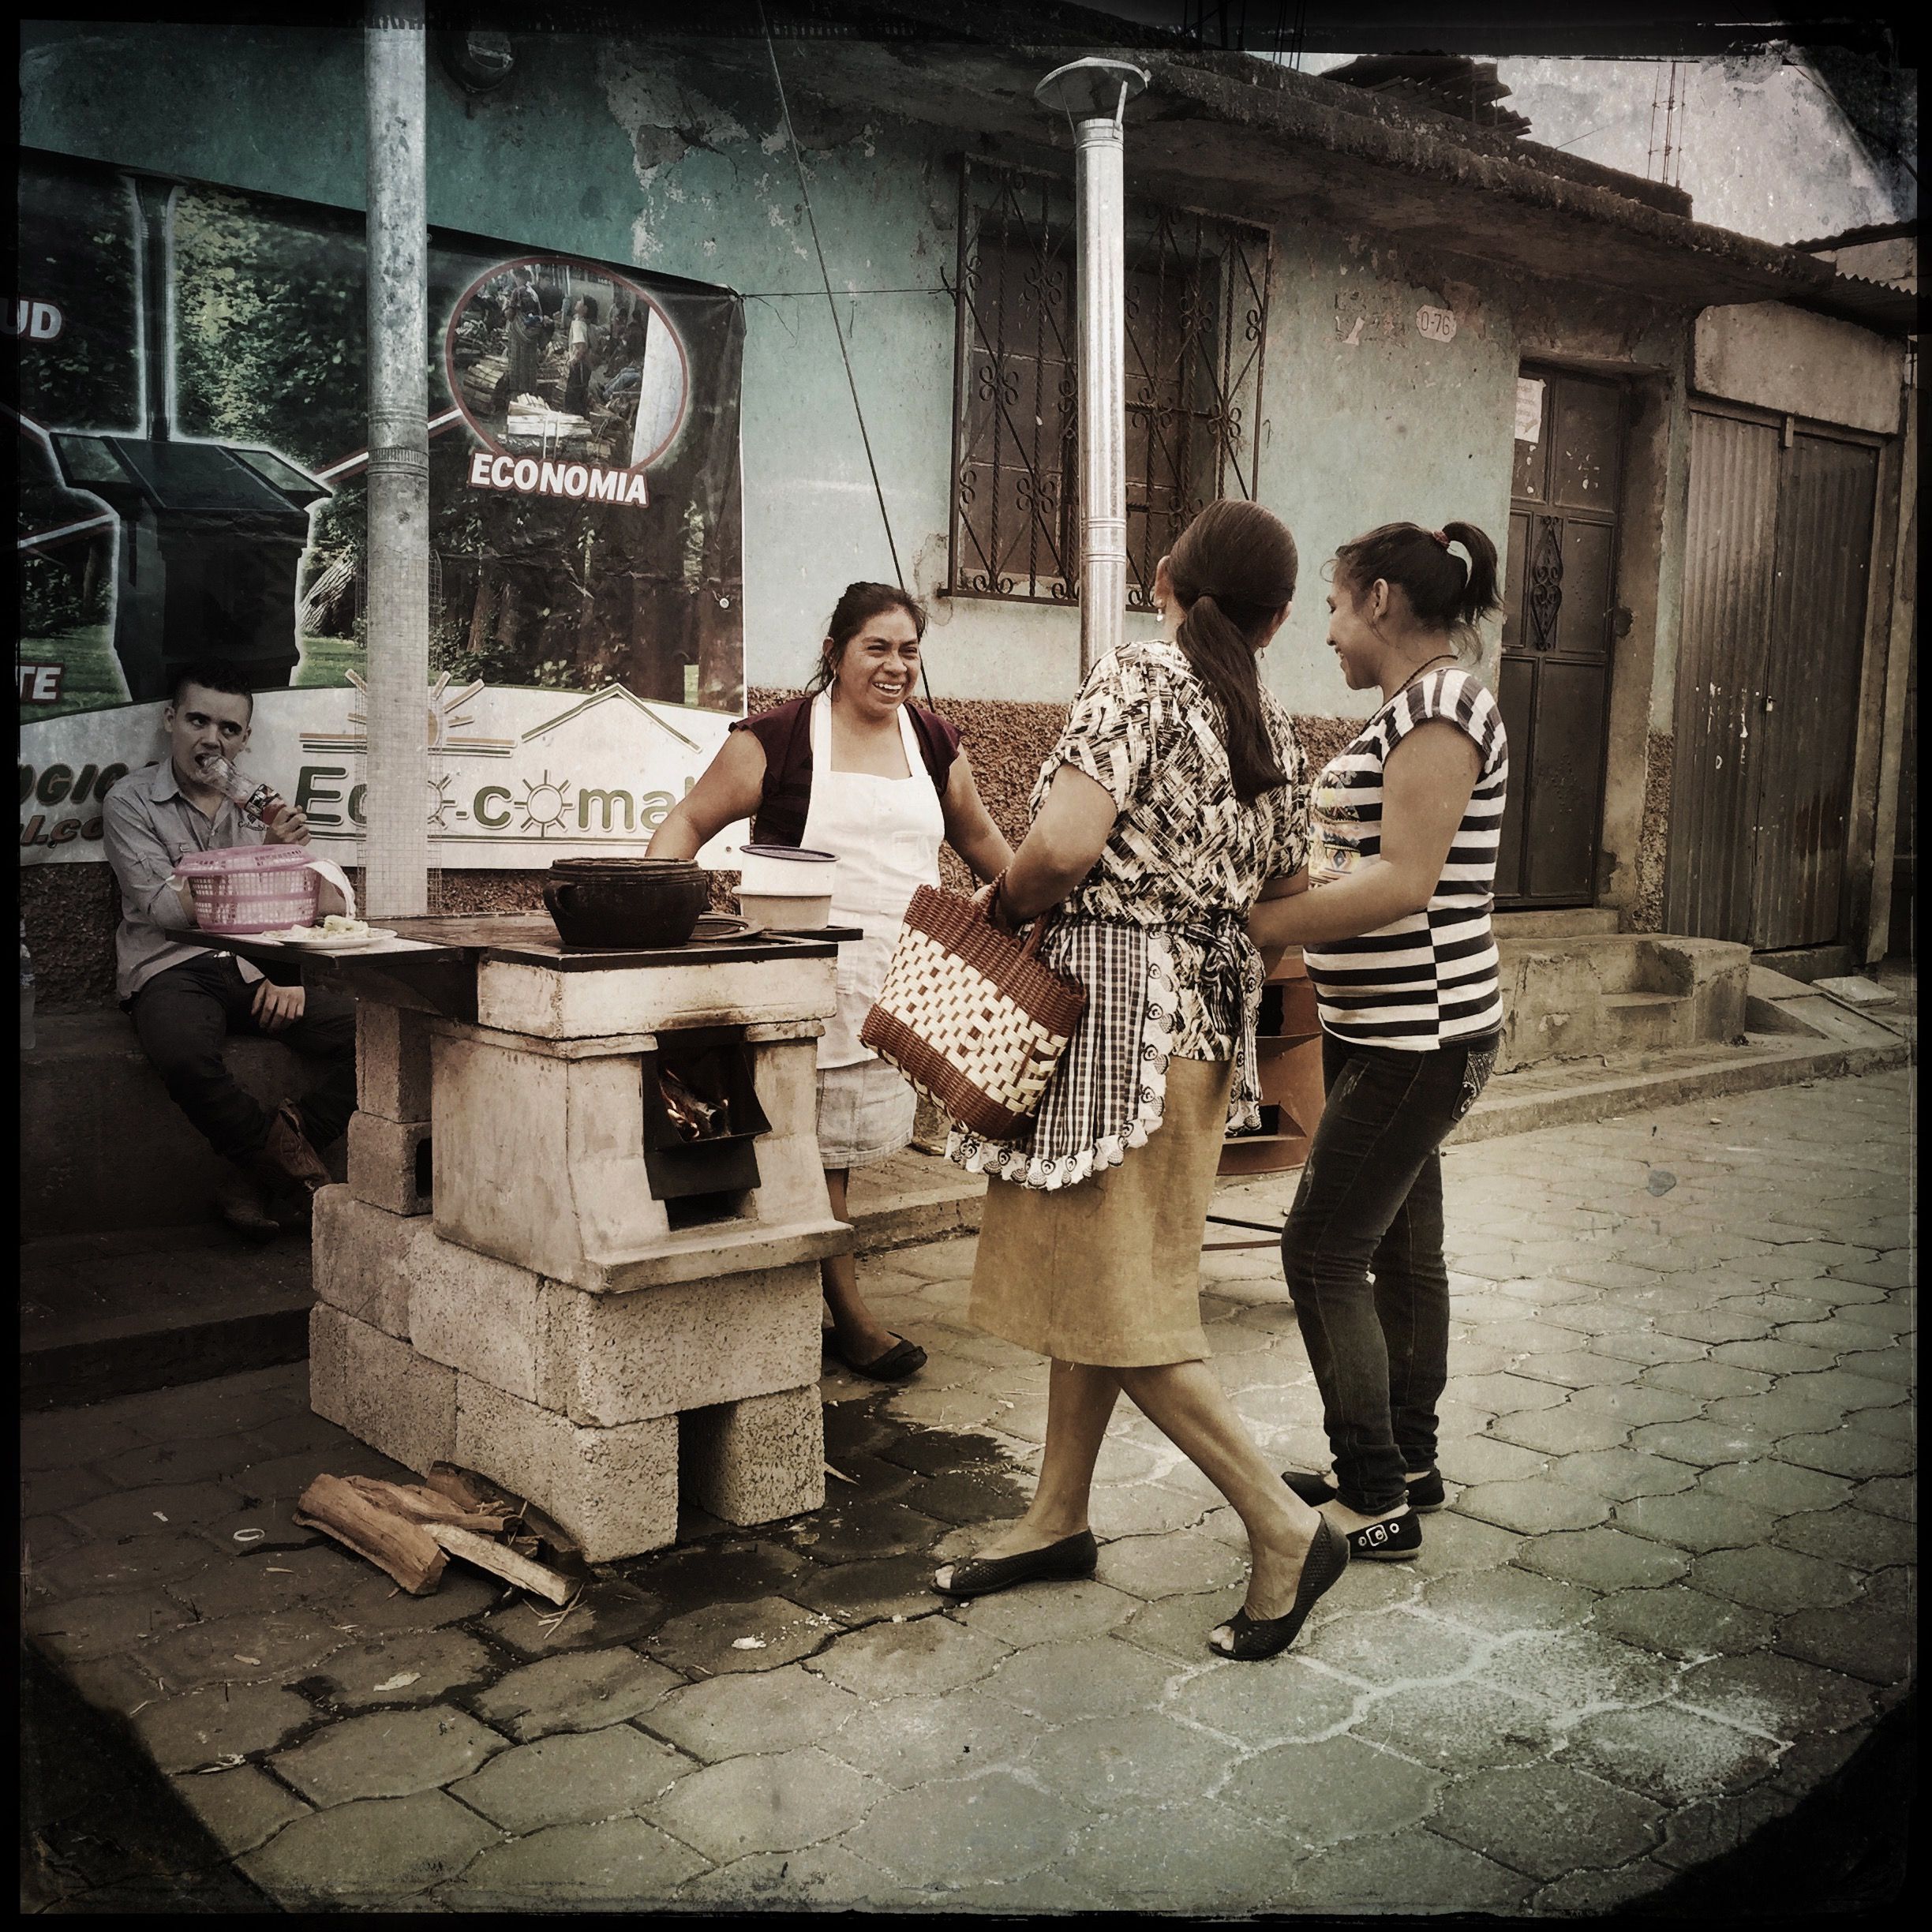 Representatives of the EcoComal stove company sell their efficient cookstoves on market day in San Antonio Aguas Calientes, Guatemala. For a stove to be fully accepted by a household, both stove and fuel must be affordable, accessible, and easy to use—goals that aren’t easy to achieve simultaneously. Photo by Lynn Johnson. Guatemala, 2017.